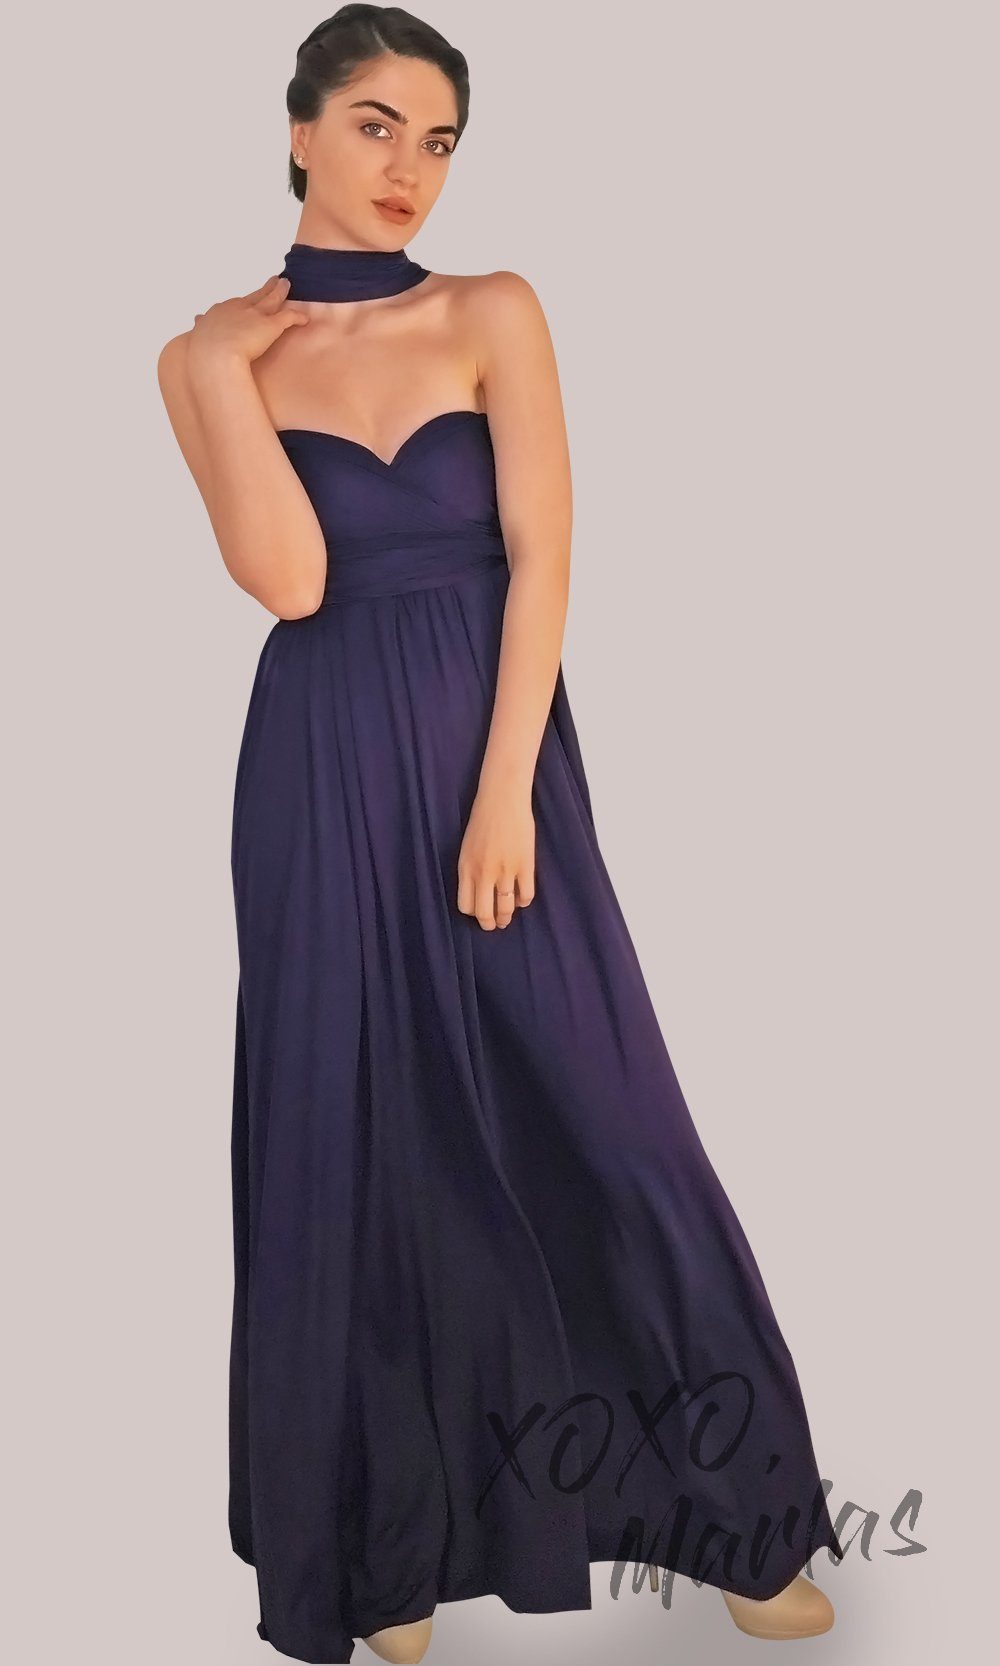 Long dark purple infinity bridesmaid dress or multiway dress or convertible dress.One dress worn in multiple ways.This eggplant one size dress is great for bridesmaid, prom, destination wedding, gala, cheap western party dress, semi formal, cocktail